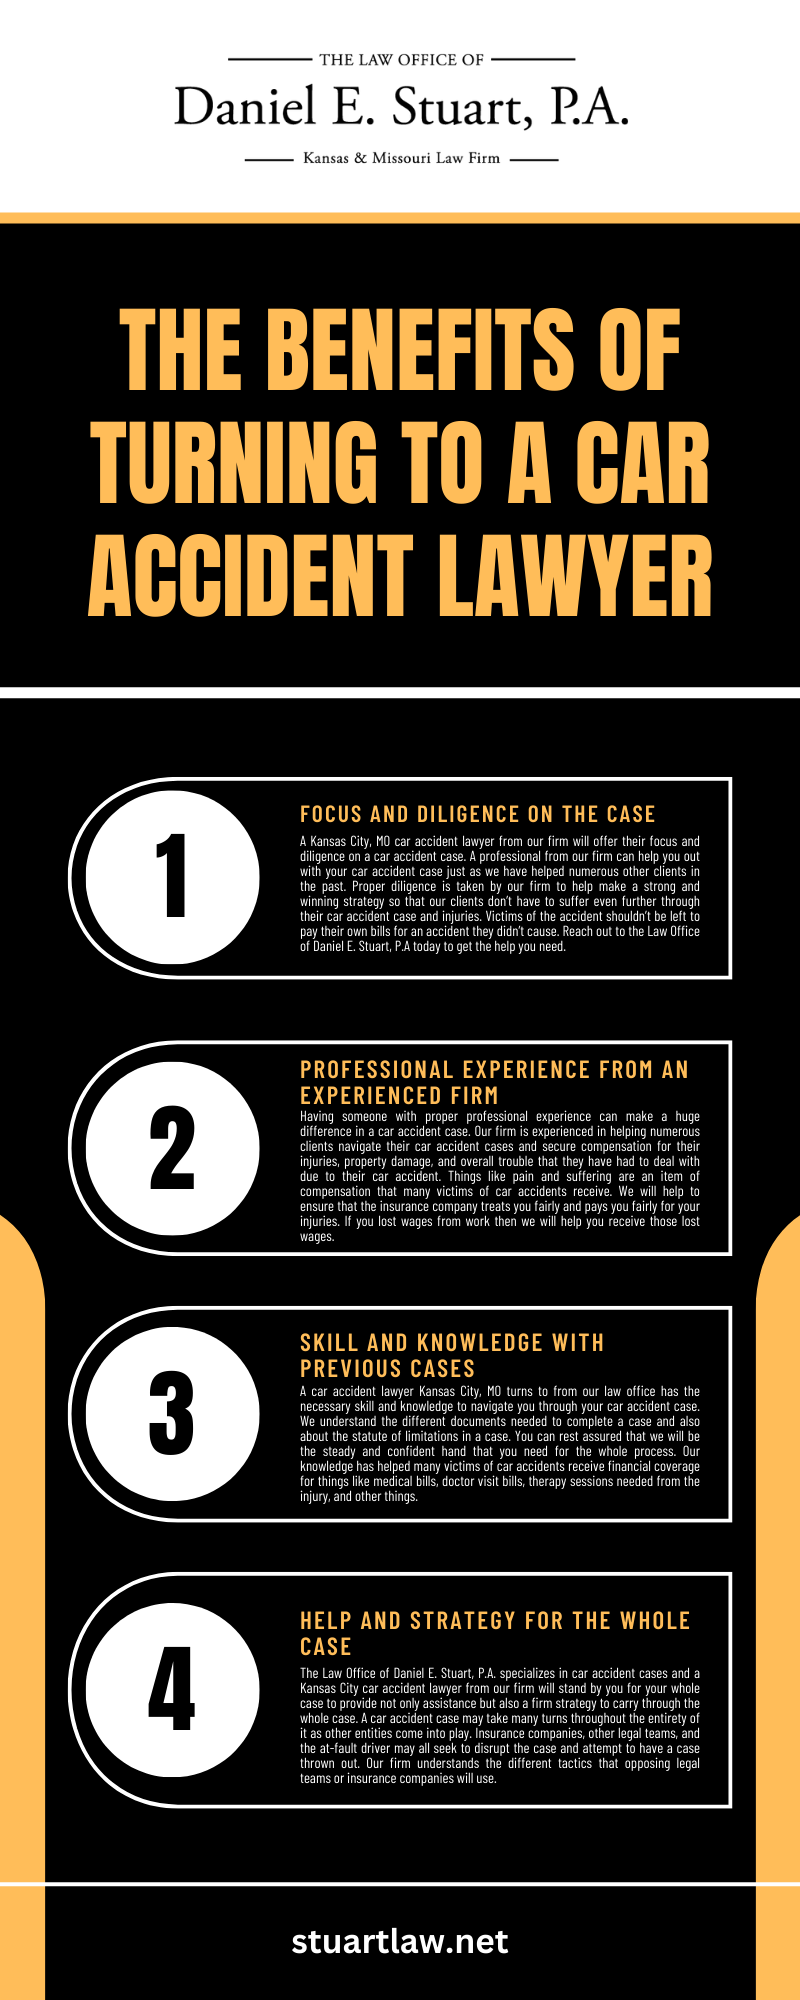 THE BENEFITS OF TURNING TO A CAR ACCIDENT LAWYER INFOGRAPHIC